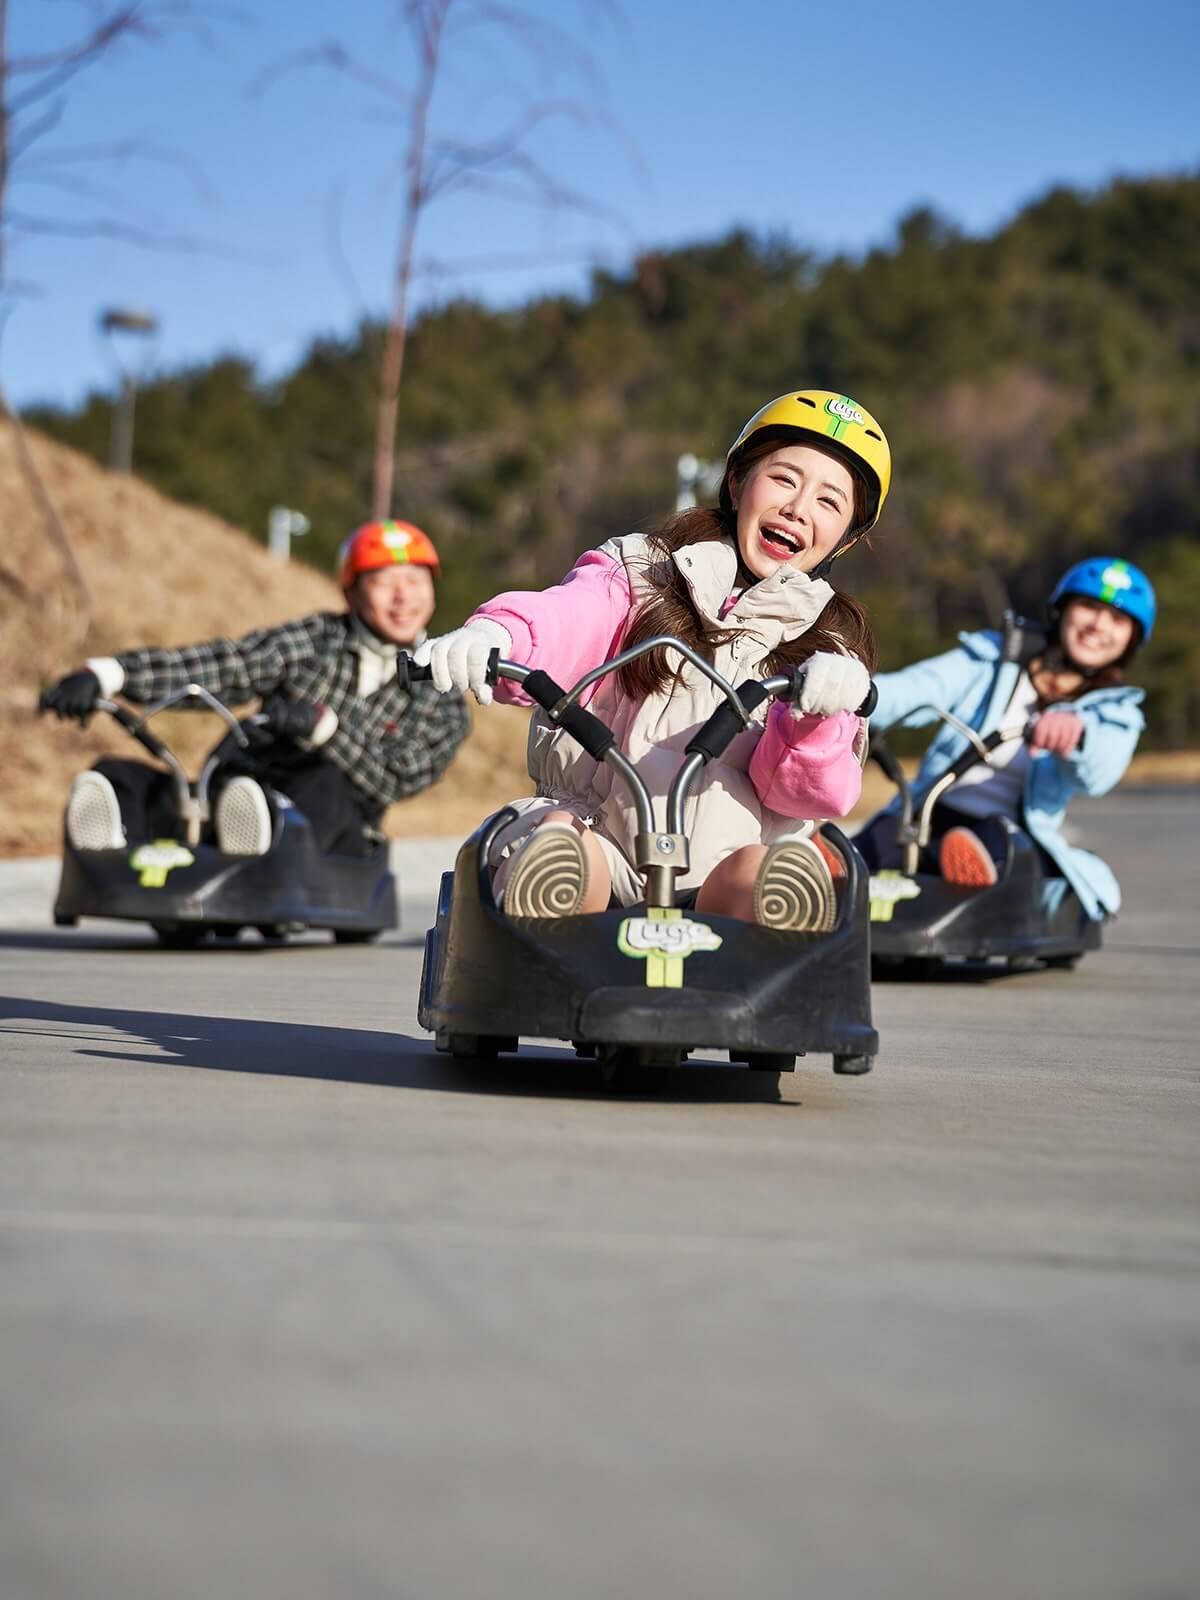 A group of people smile as they ride around a corner on the Luge.